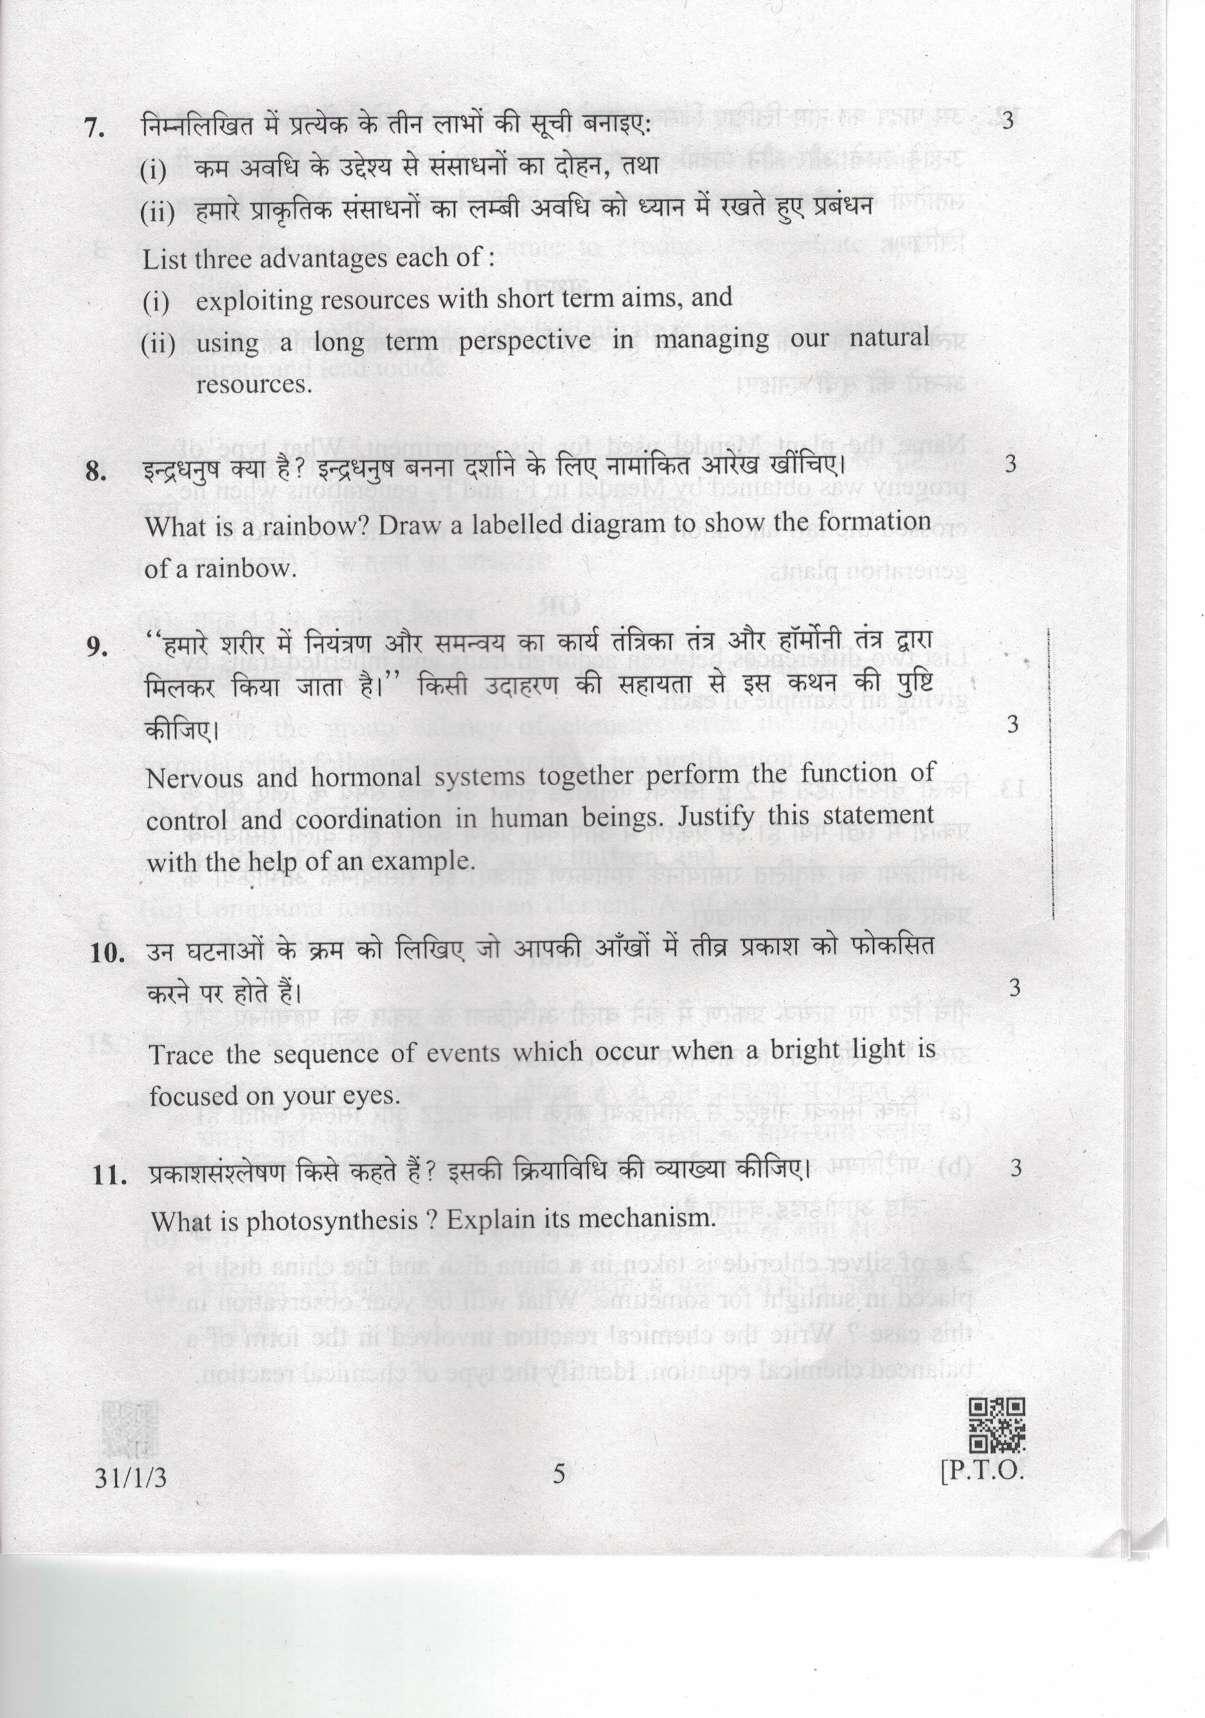 CBSE Class 10 31-1-3 Science 2019 Question Paper - Page 5